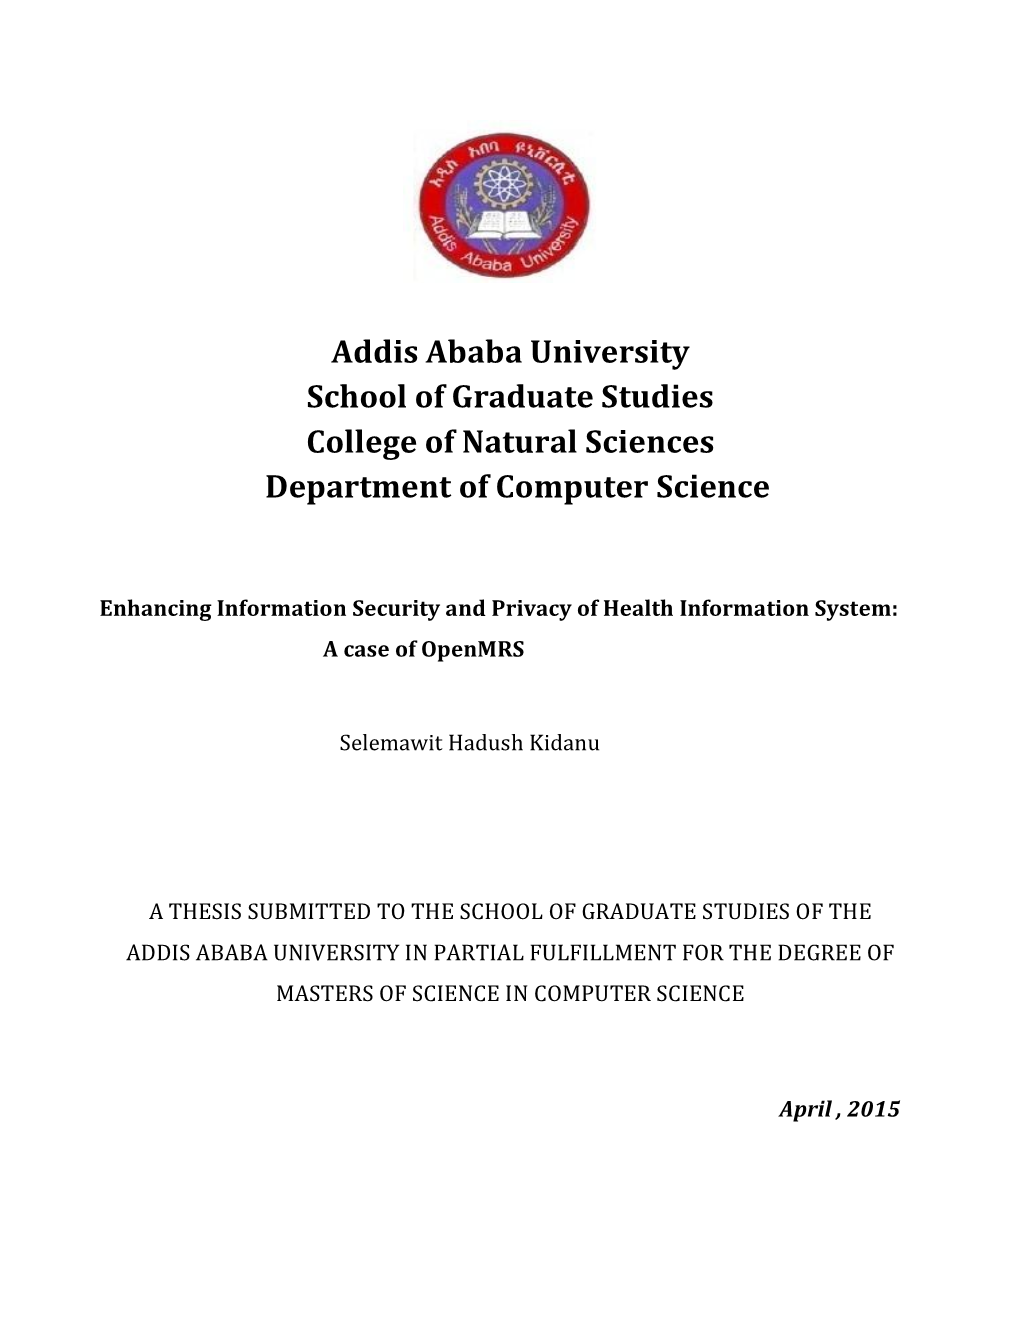 Addis Ababa University School of Graduate Studies College of Natural Sciences Department of Computer Science